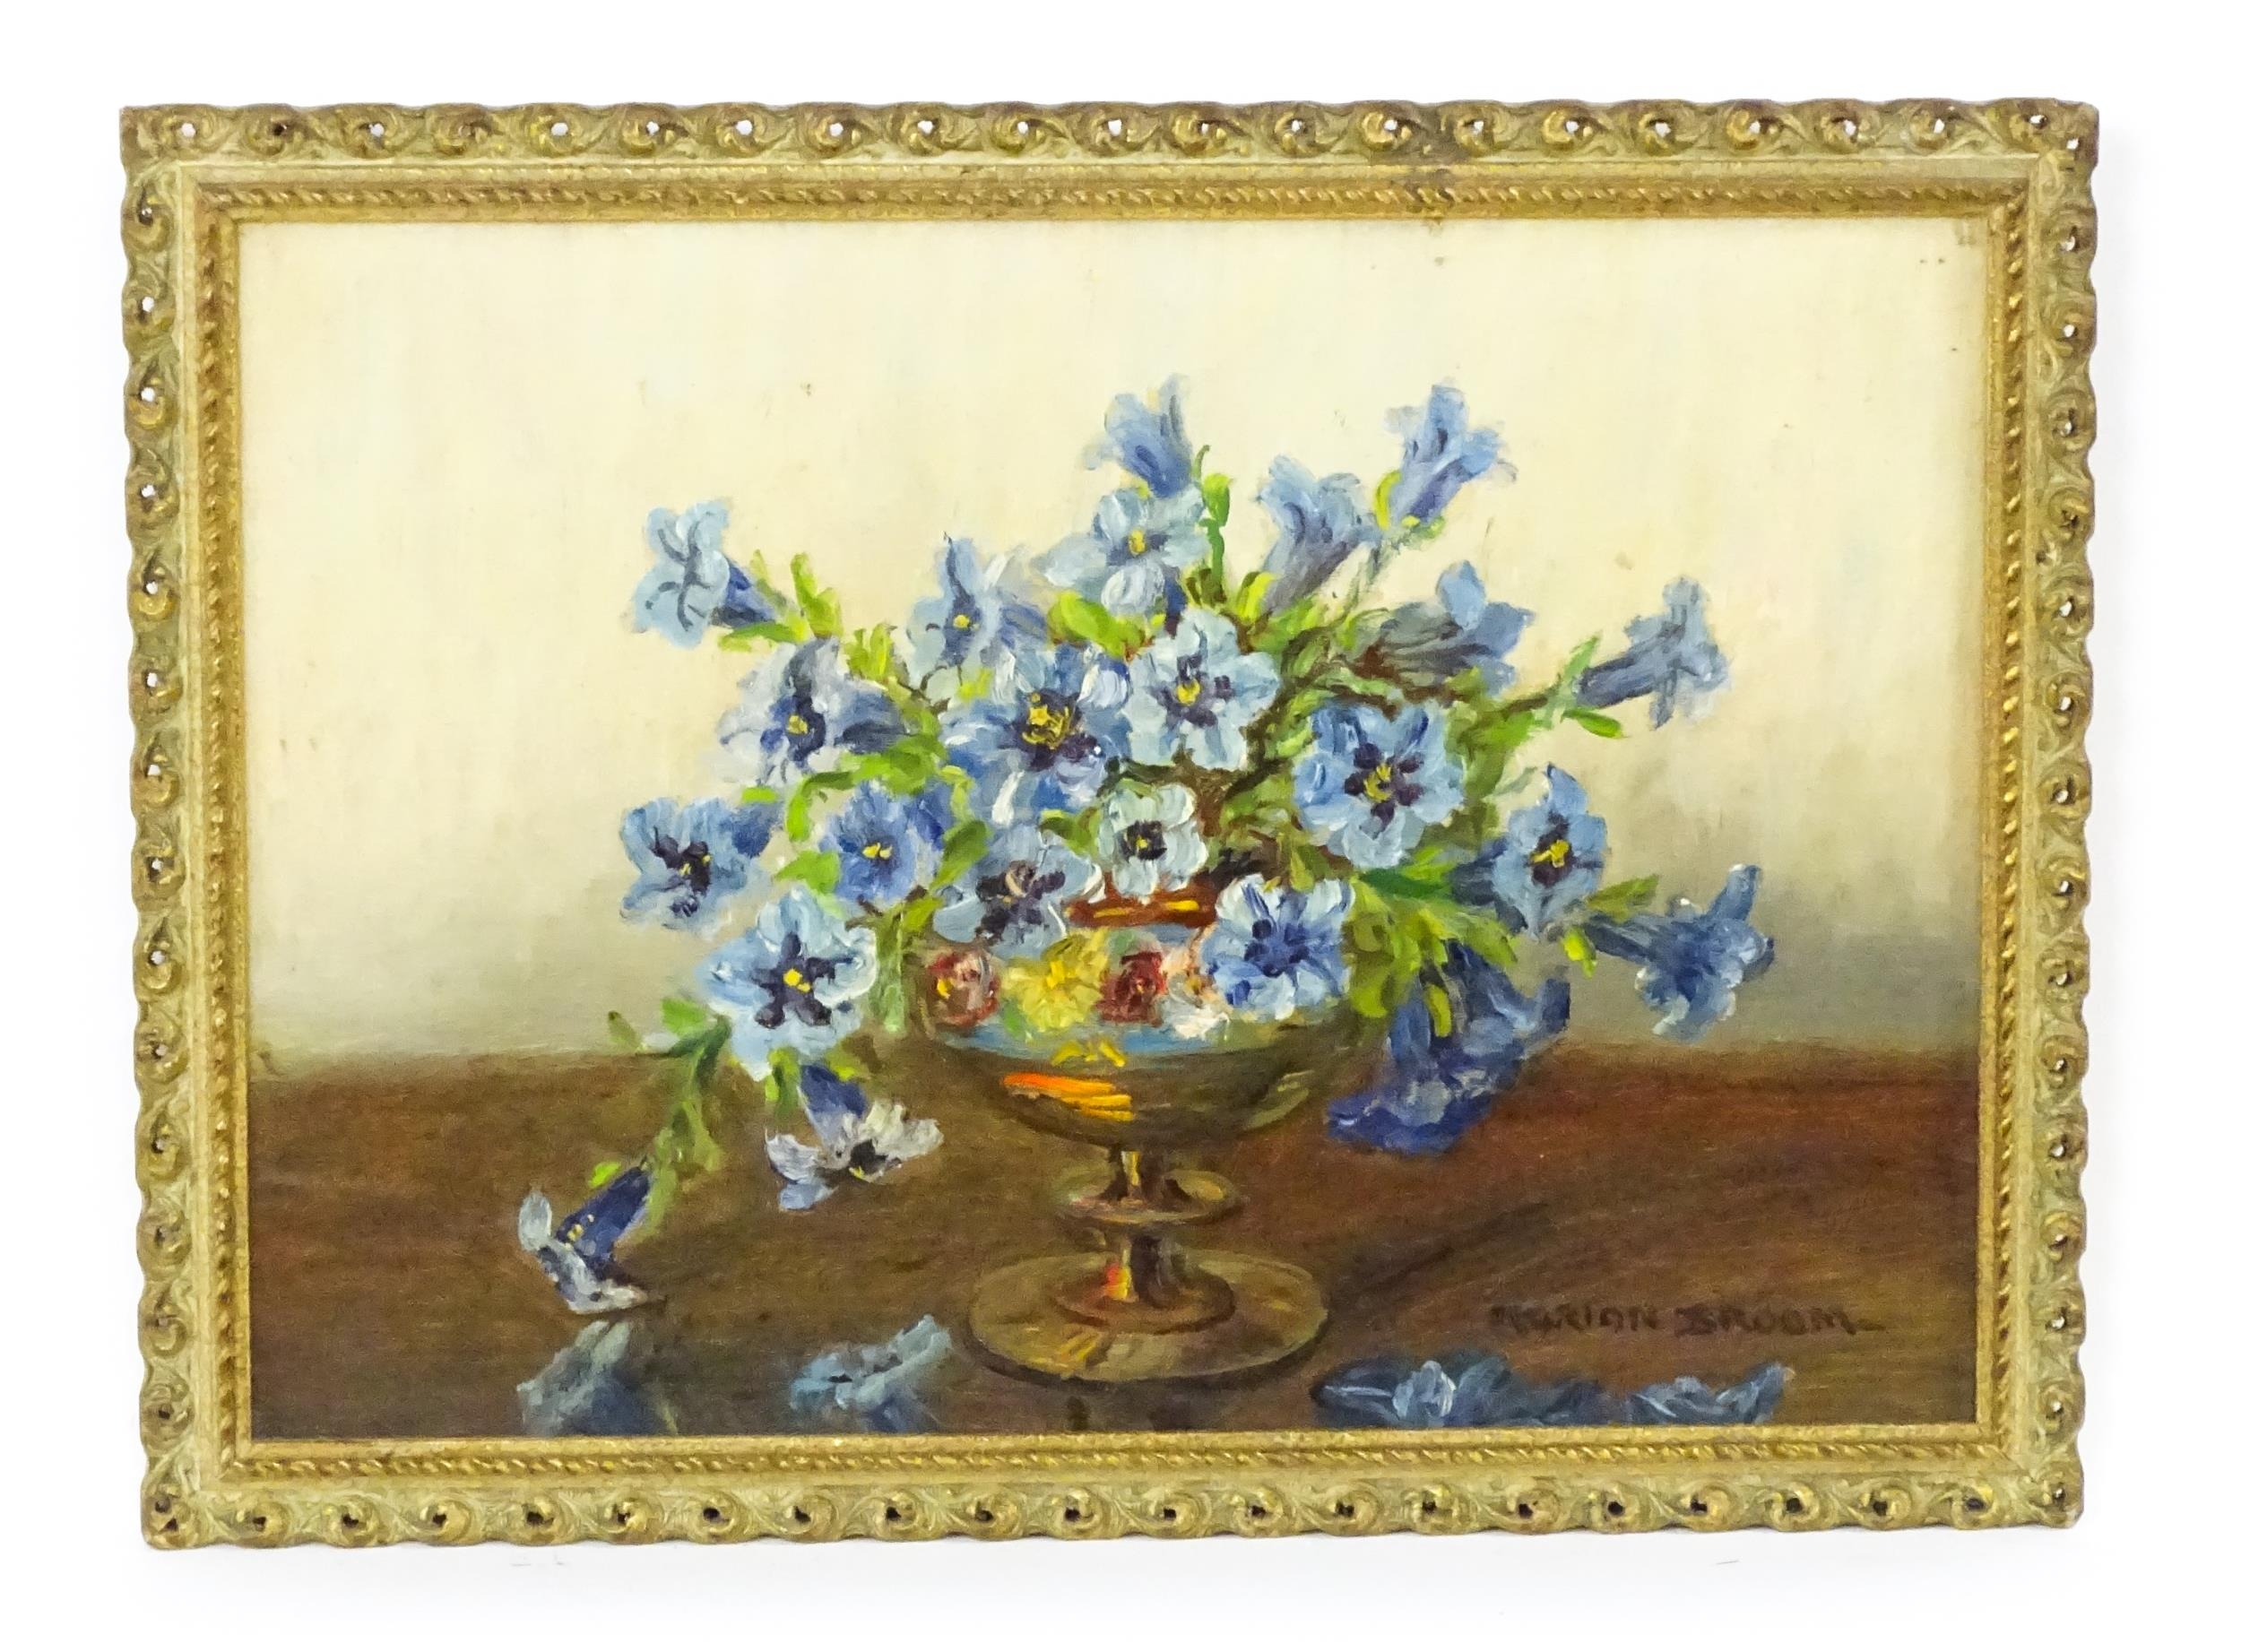 Marion Broom (1878-1962), Oil on board, A still life study of blue gentian flowers in a pedestal